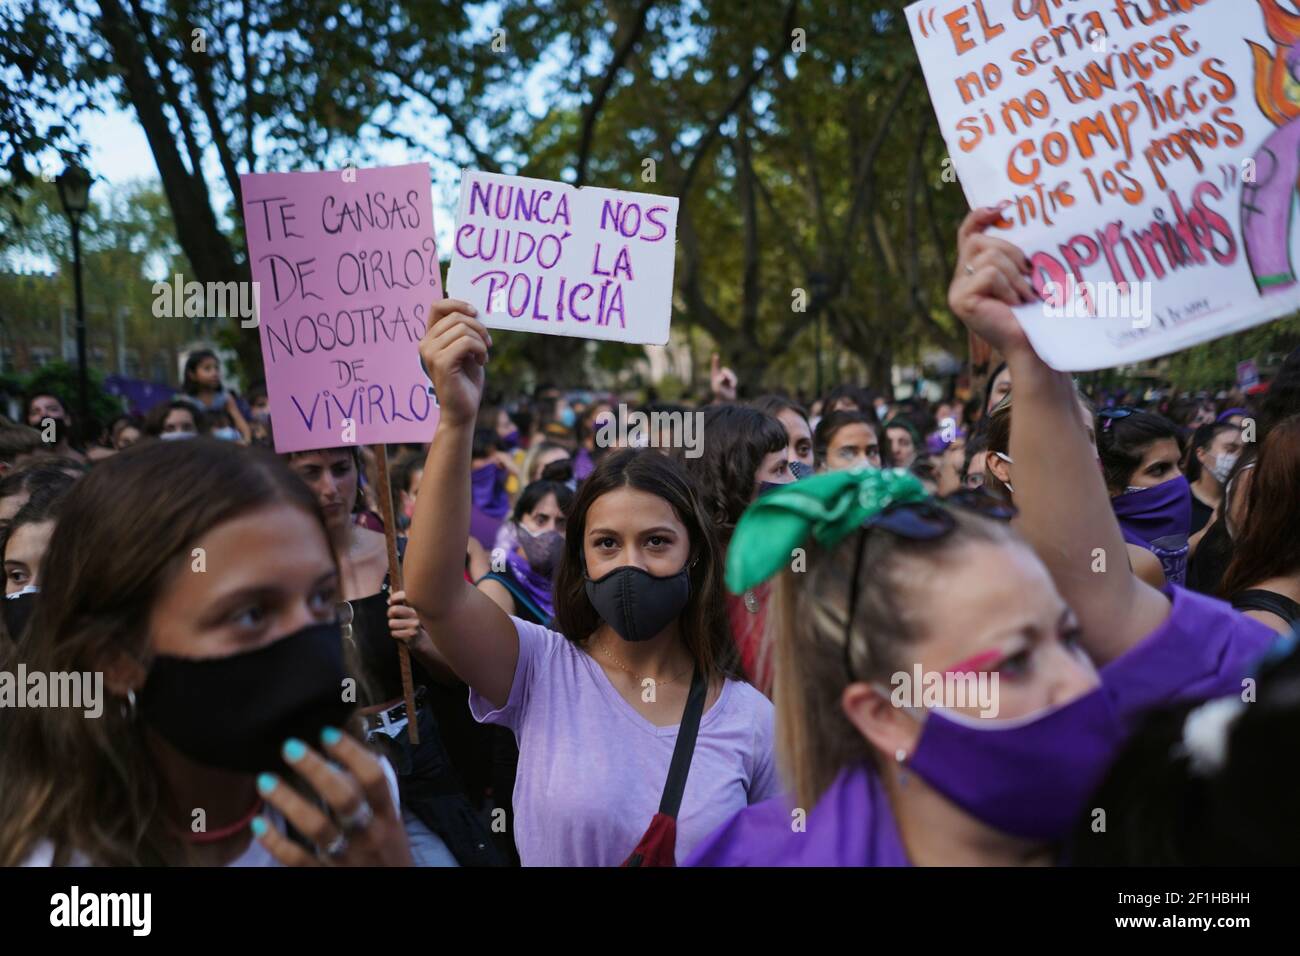 Participants hold up signs to mark International Women's Day during a march  down Avenida 18 de Julio in downtown Montevideo, Uruguay March 8, 2021. The  signs read (L) "Are you tired of